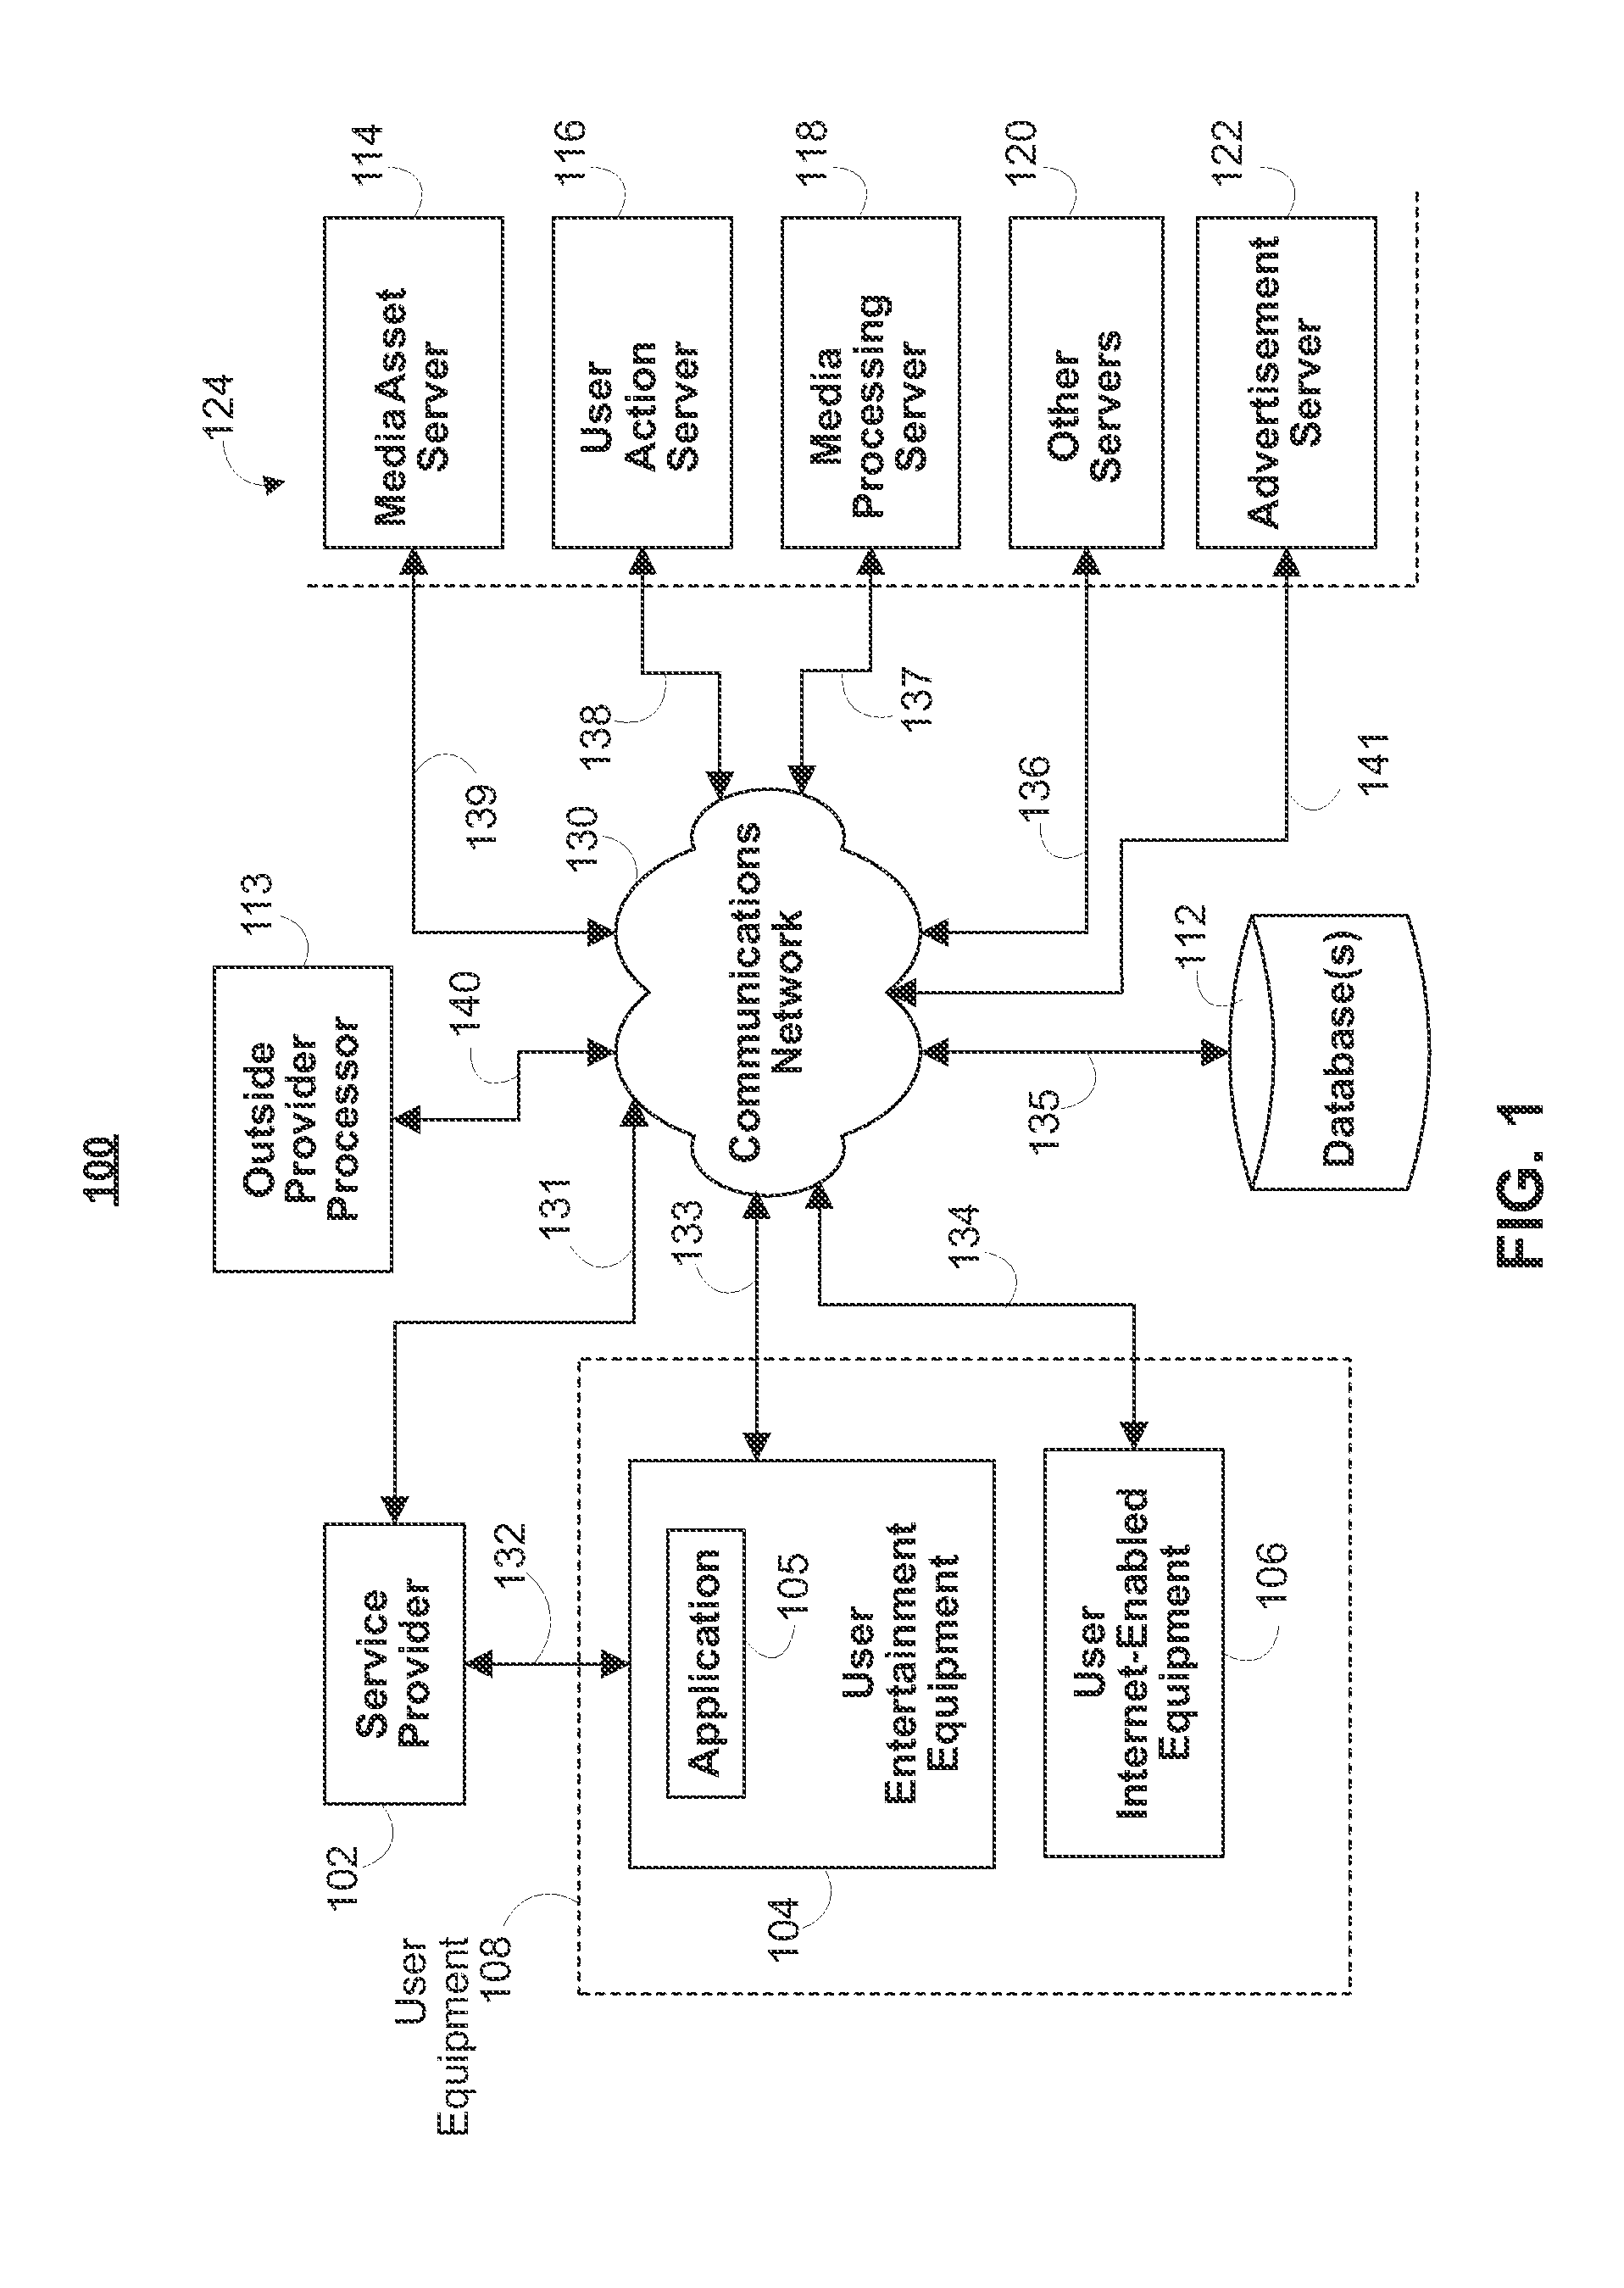 Systems and methods for selectively modifying the display of advertisements based on an interactive gaming environment